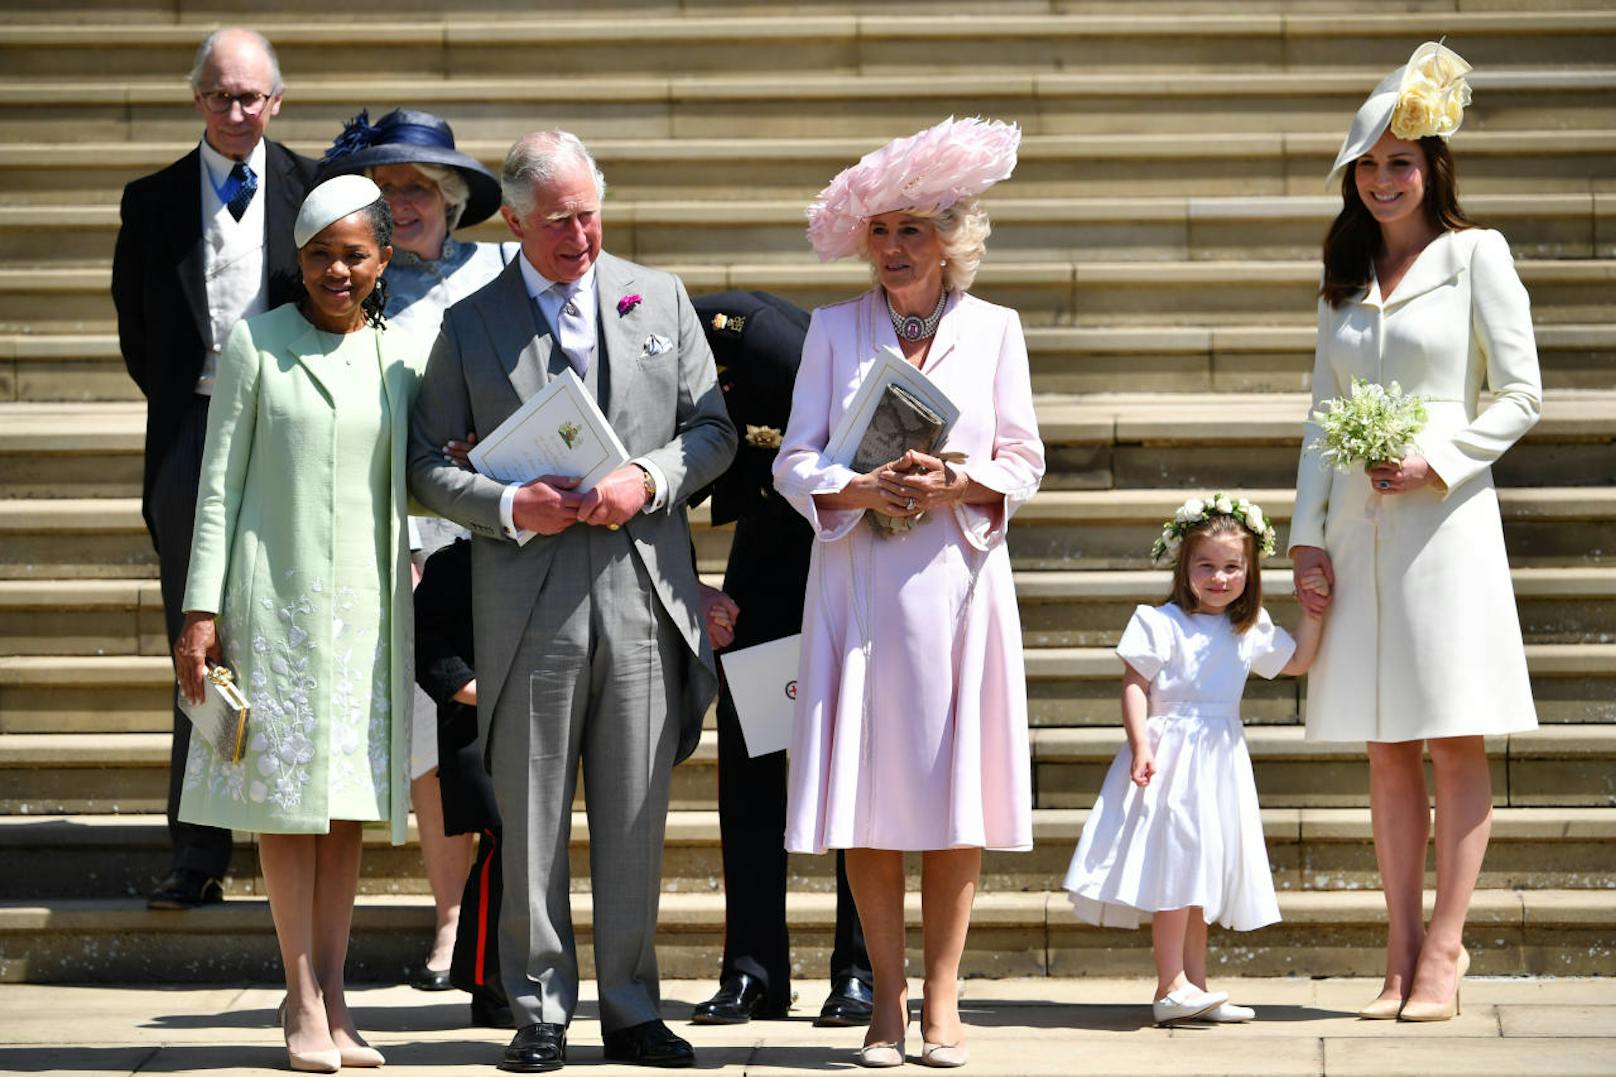 WINDSOR, UNITED KINGDOM - MAY 19:  (L-R) Doria Ragland, Prince Charles, Prince of Wales, Camilla, Duchess of Cornwall, and Catherine, Duchess of Cambridge holding her daughter Princess Charlotte's hand as they leave from the West Door of St George's Chapel, Windsor Castle, in Windsor on May 19, 2018 in Windsor, England. (Photo by  Ben STANSALL - WPA Pool/Getty Images)